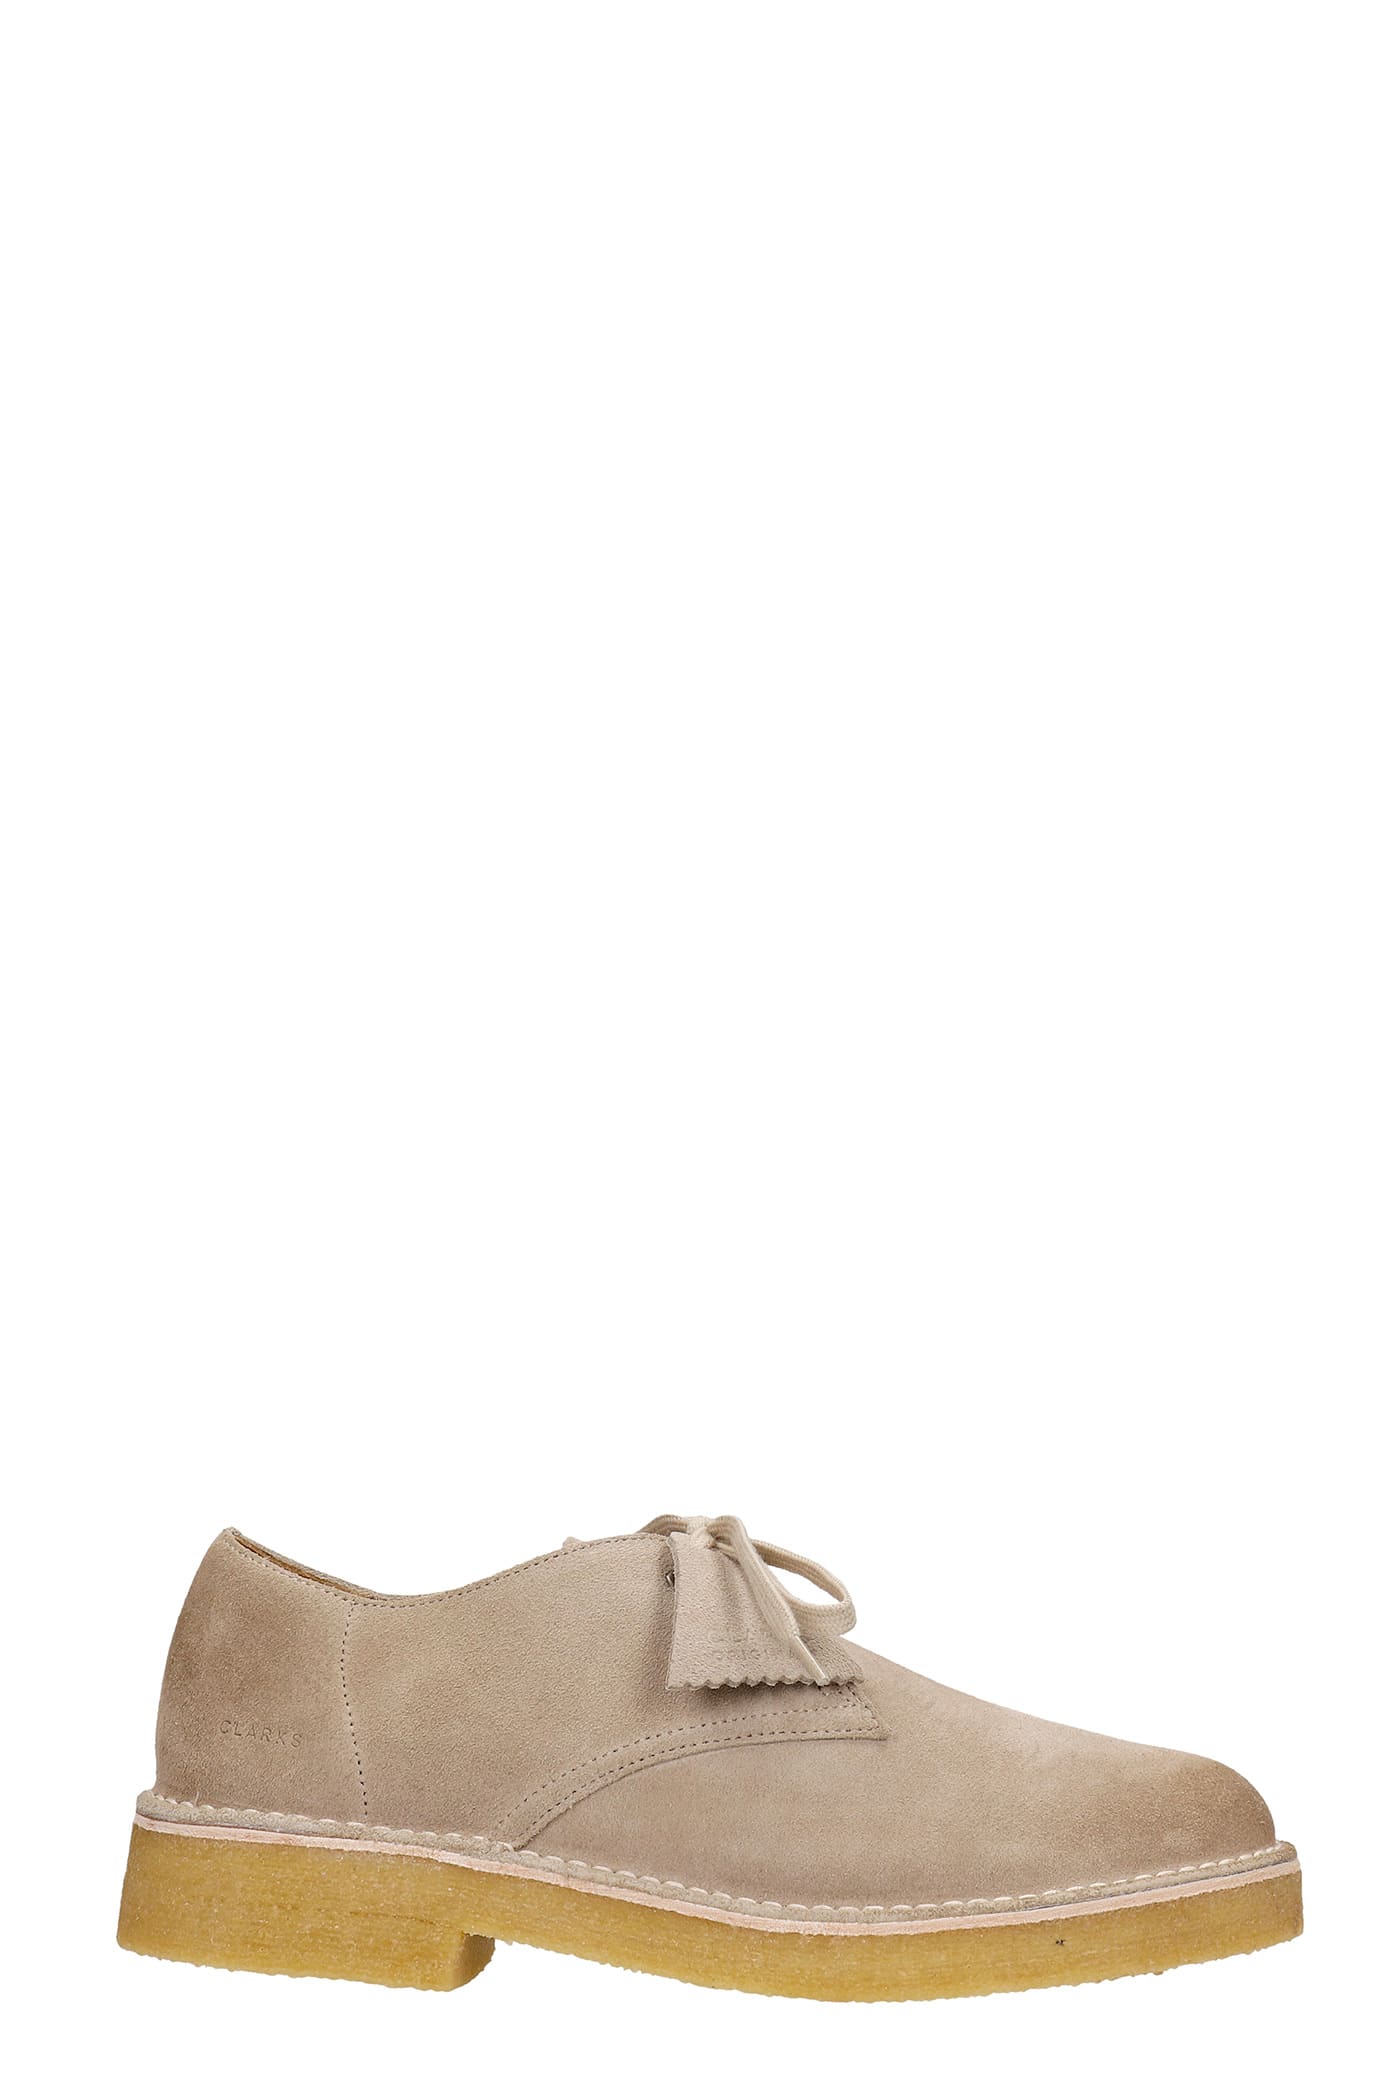 Clarks Desert Khan 221 Lace Up Shoes In Beige Suede